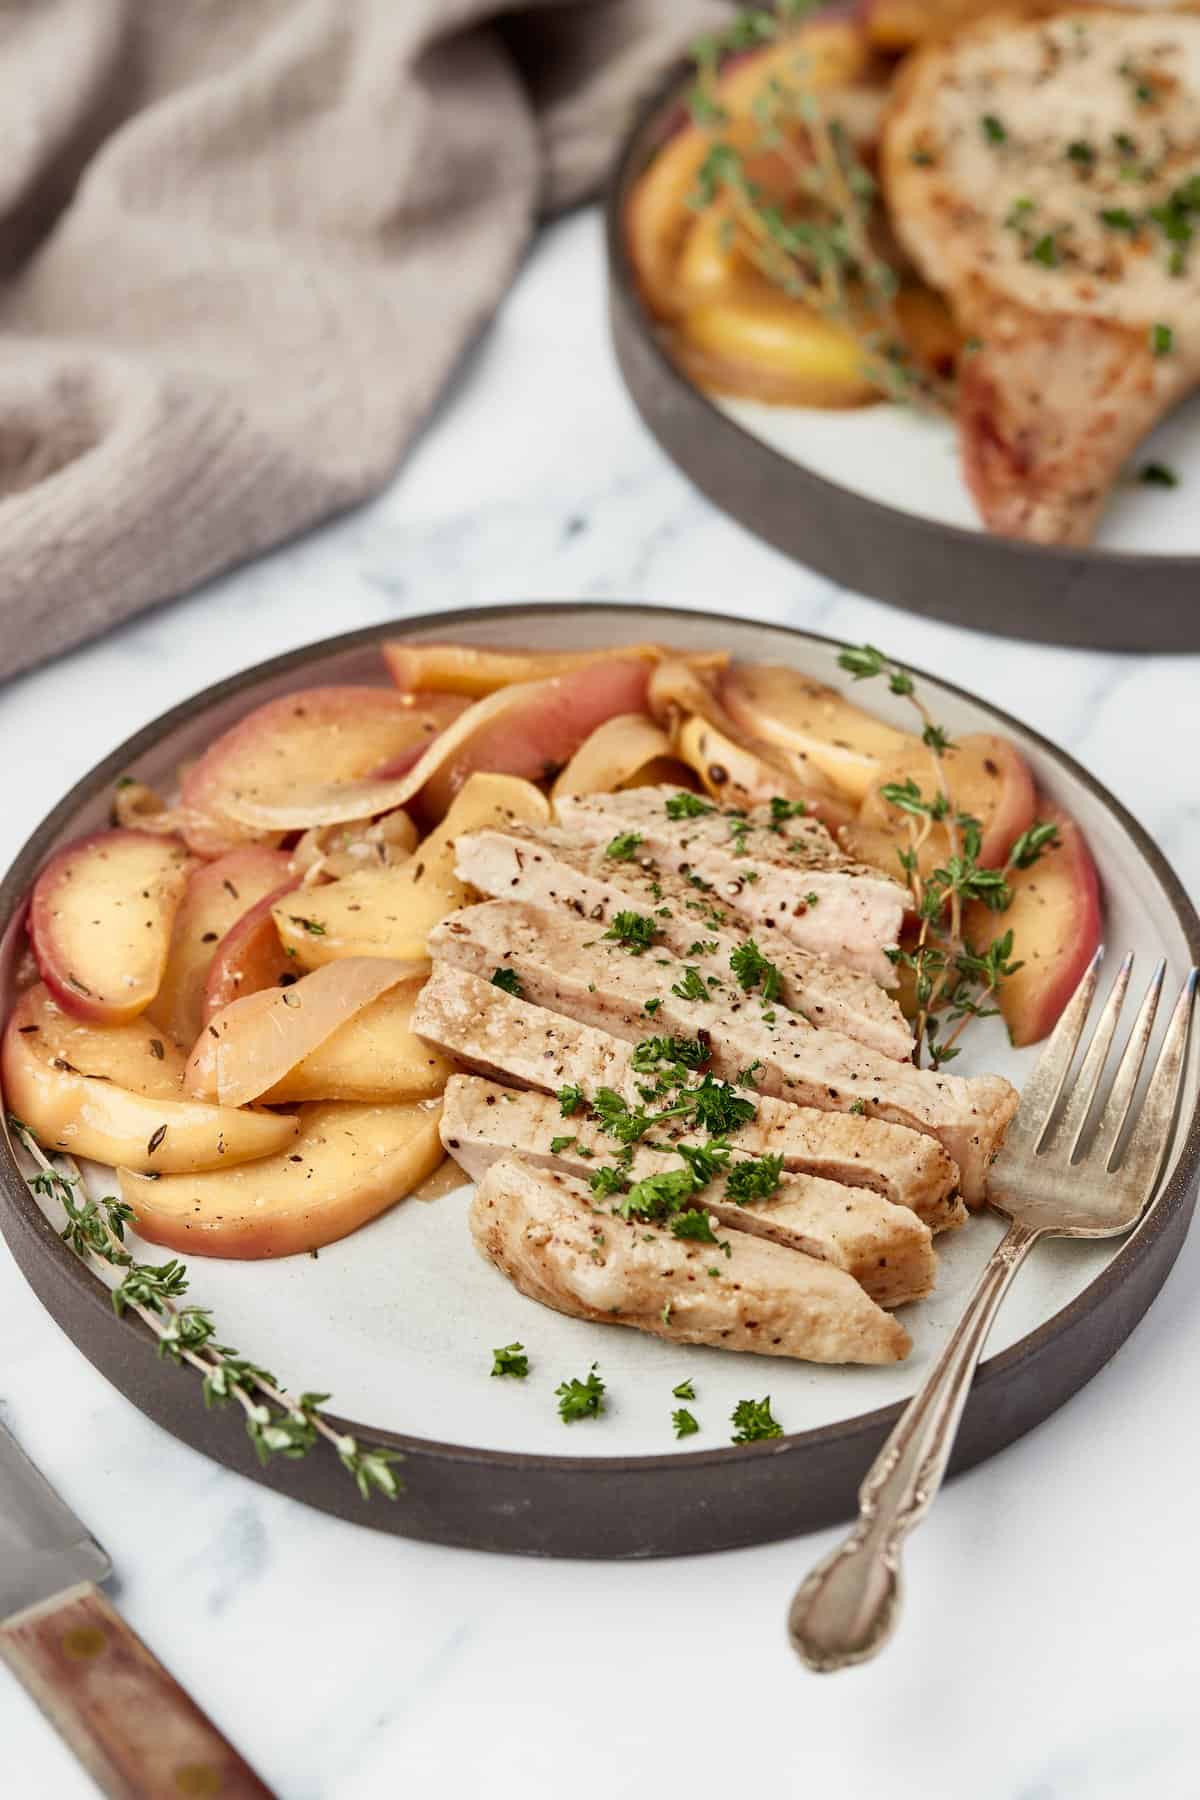 Plate of pork chops with apples and onions